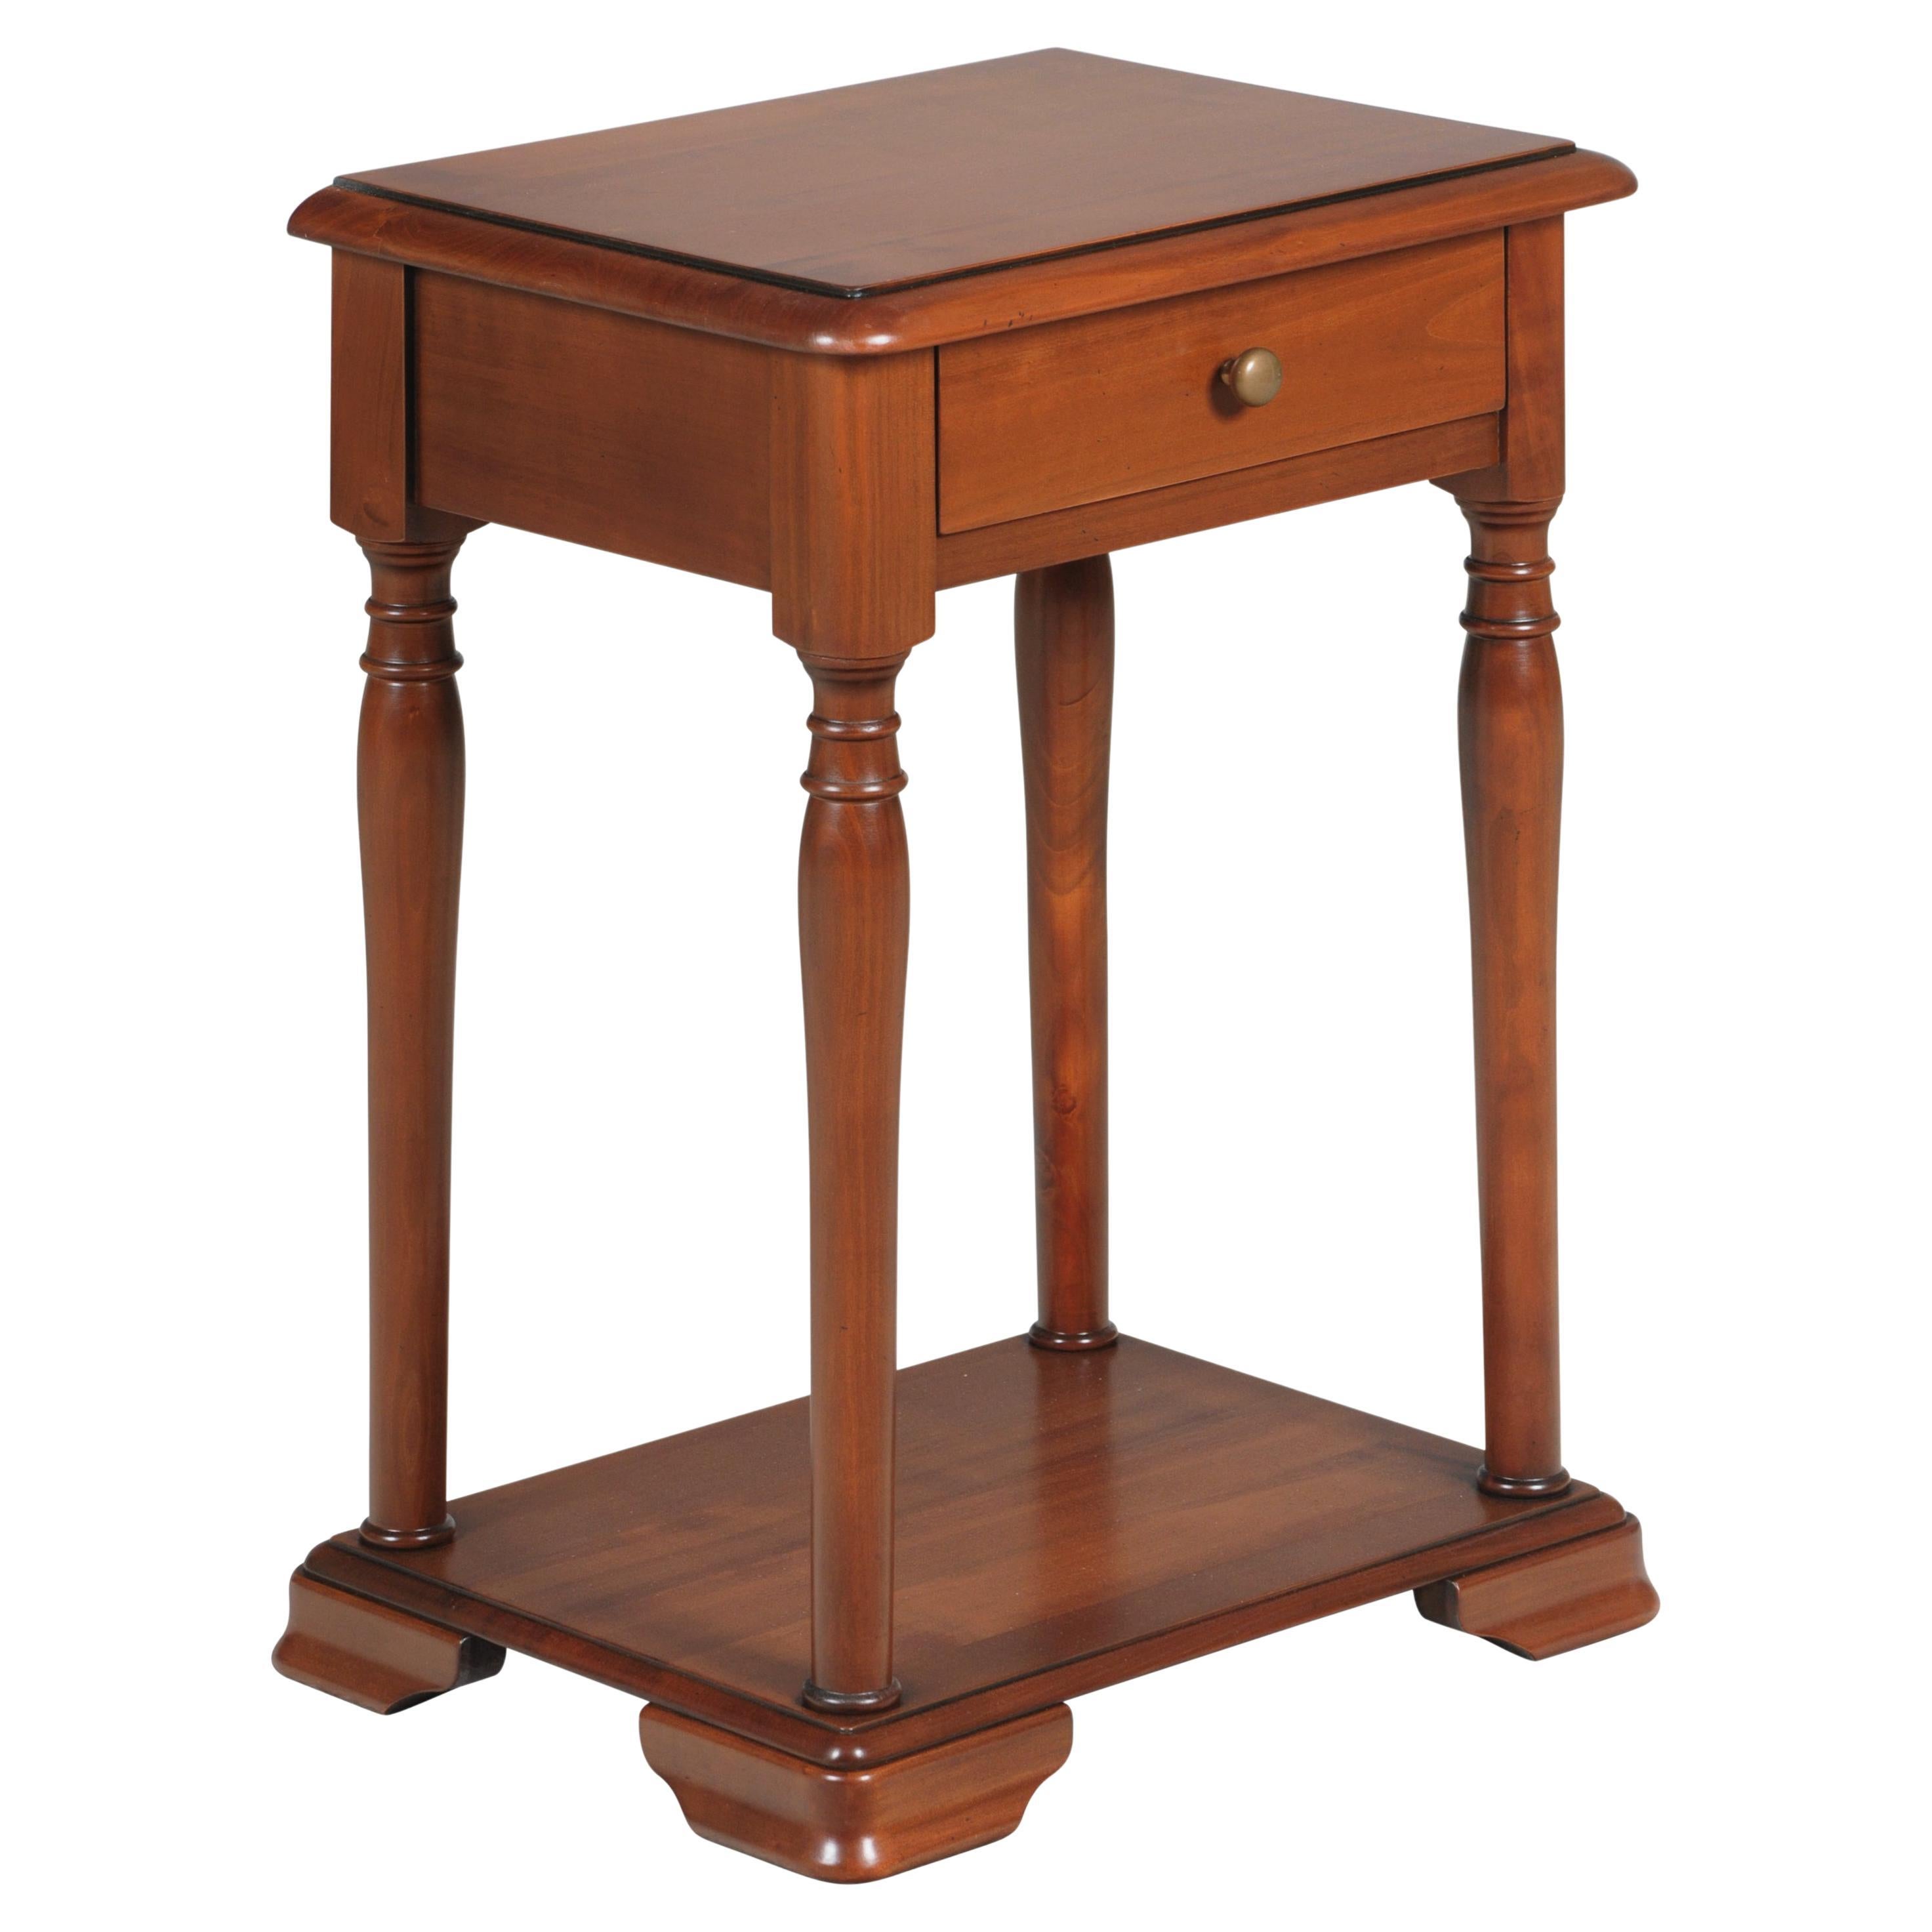 Louis Philippe Style Bedside Table with turned feet in solid cherry